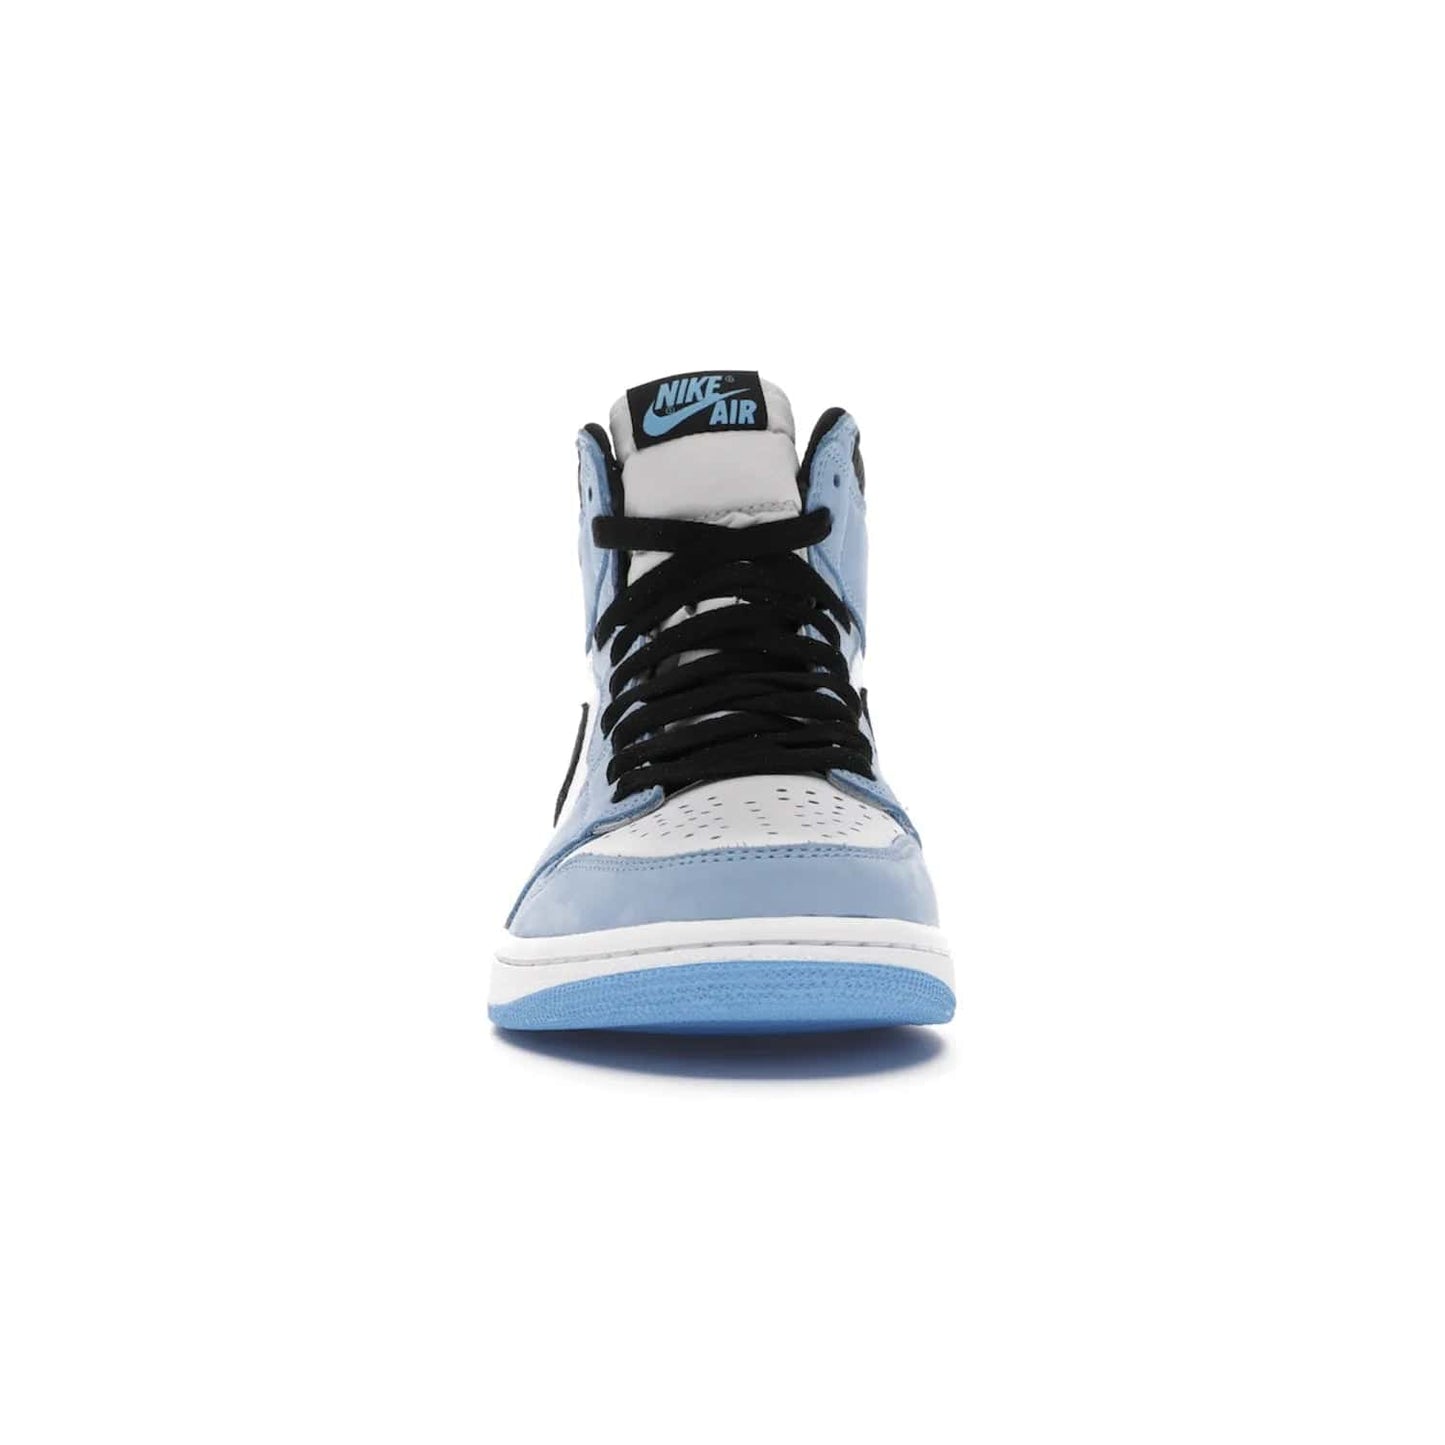 Jordan 1 Retro High White University Blue Black - Image 10 - Only at www.BallersClubKickz.com - Shop the Air Jordan 1 Retro High University Blue. White and black tumbled leather upper with University Blue Durabuck overlays, Nike Air woven label, Air Jordan Wings Logo, white midsole and University Blue outsole. Available March 2021.